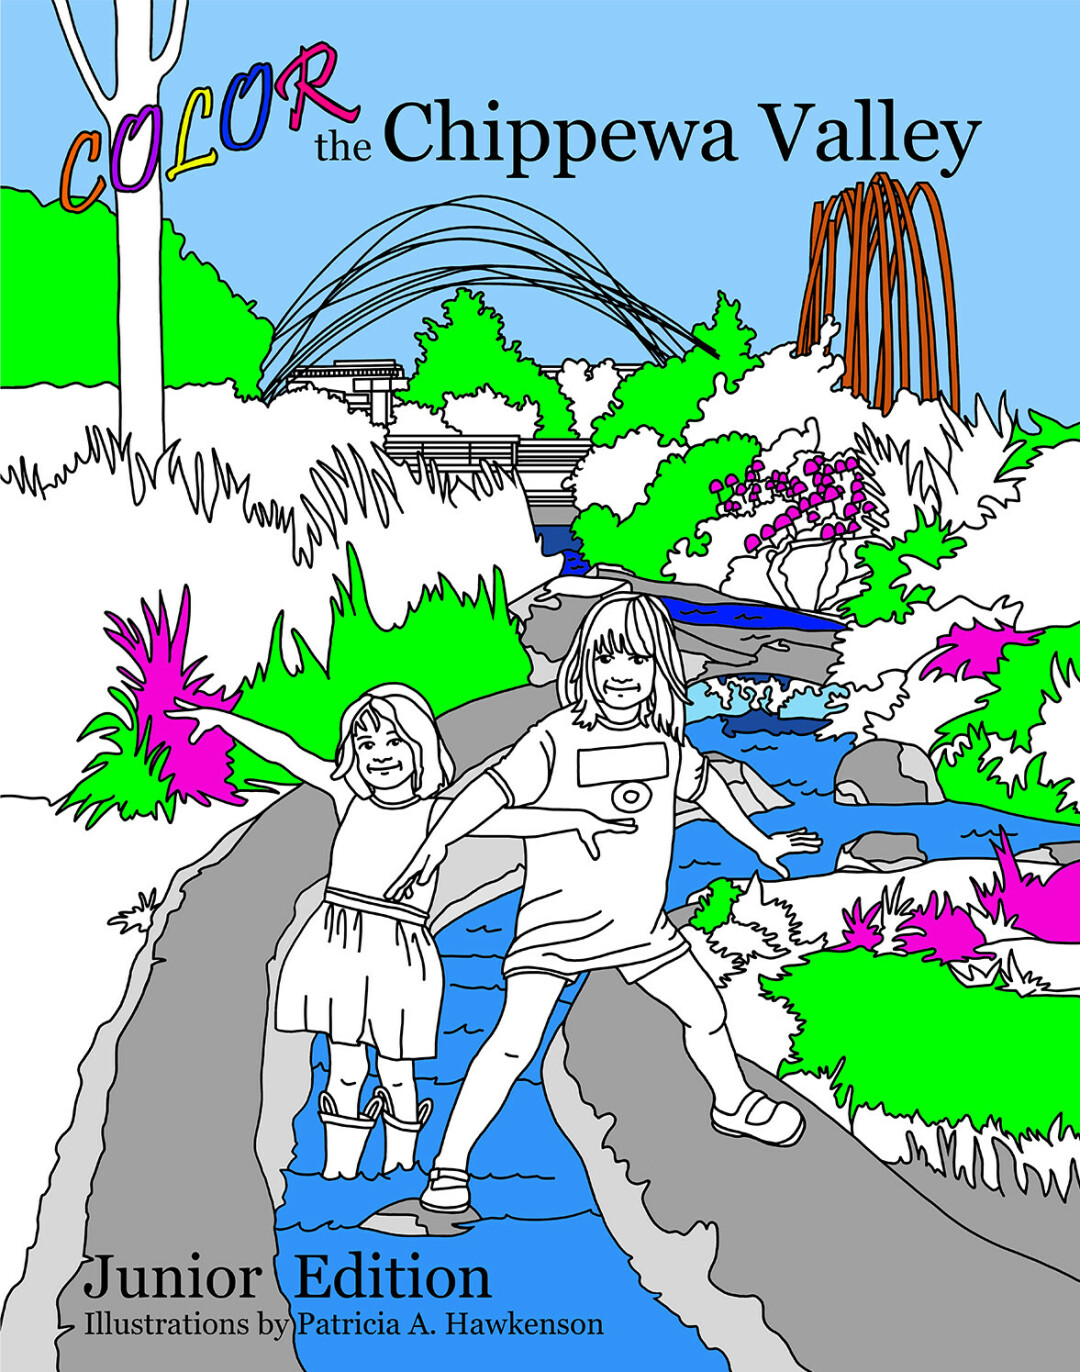 FOR THE YOUTH. 'Color the Chippewa Valley: Junior Edition' is coming soon from local artist Patricia A. Hawkenson. (Submitted photos)